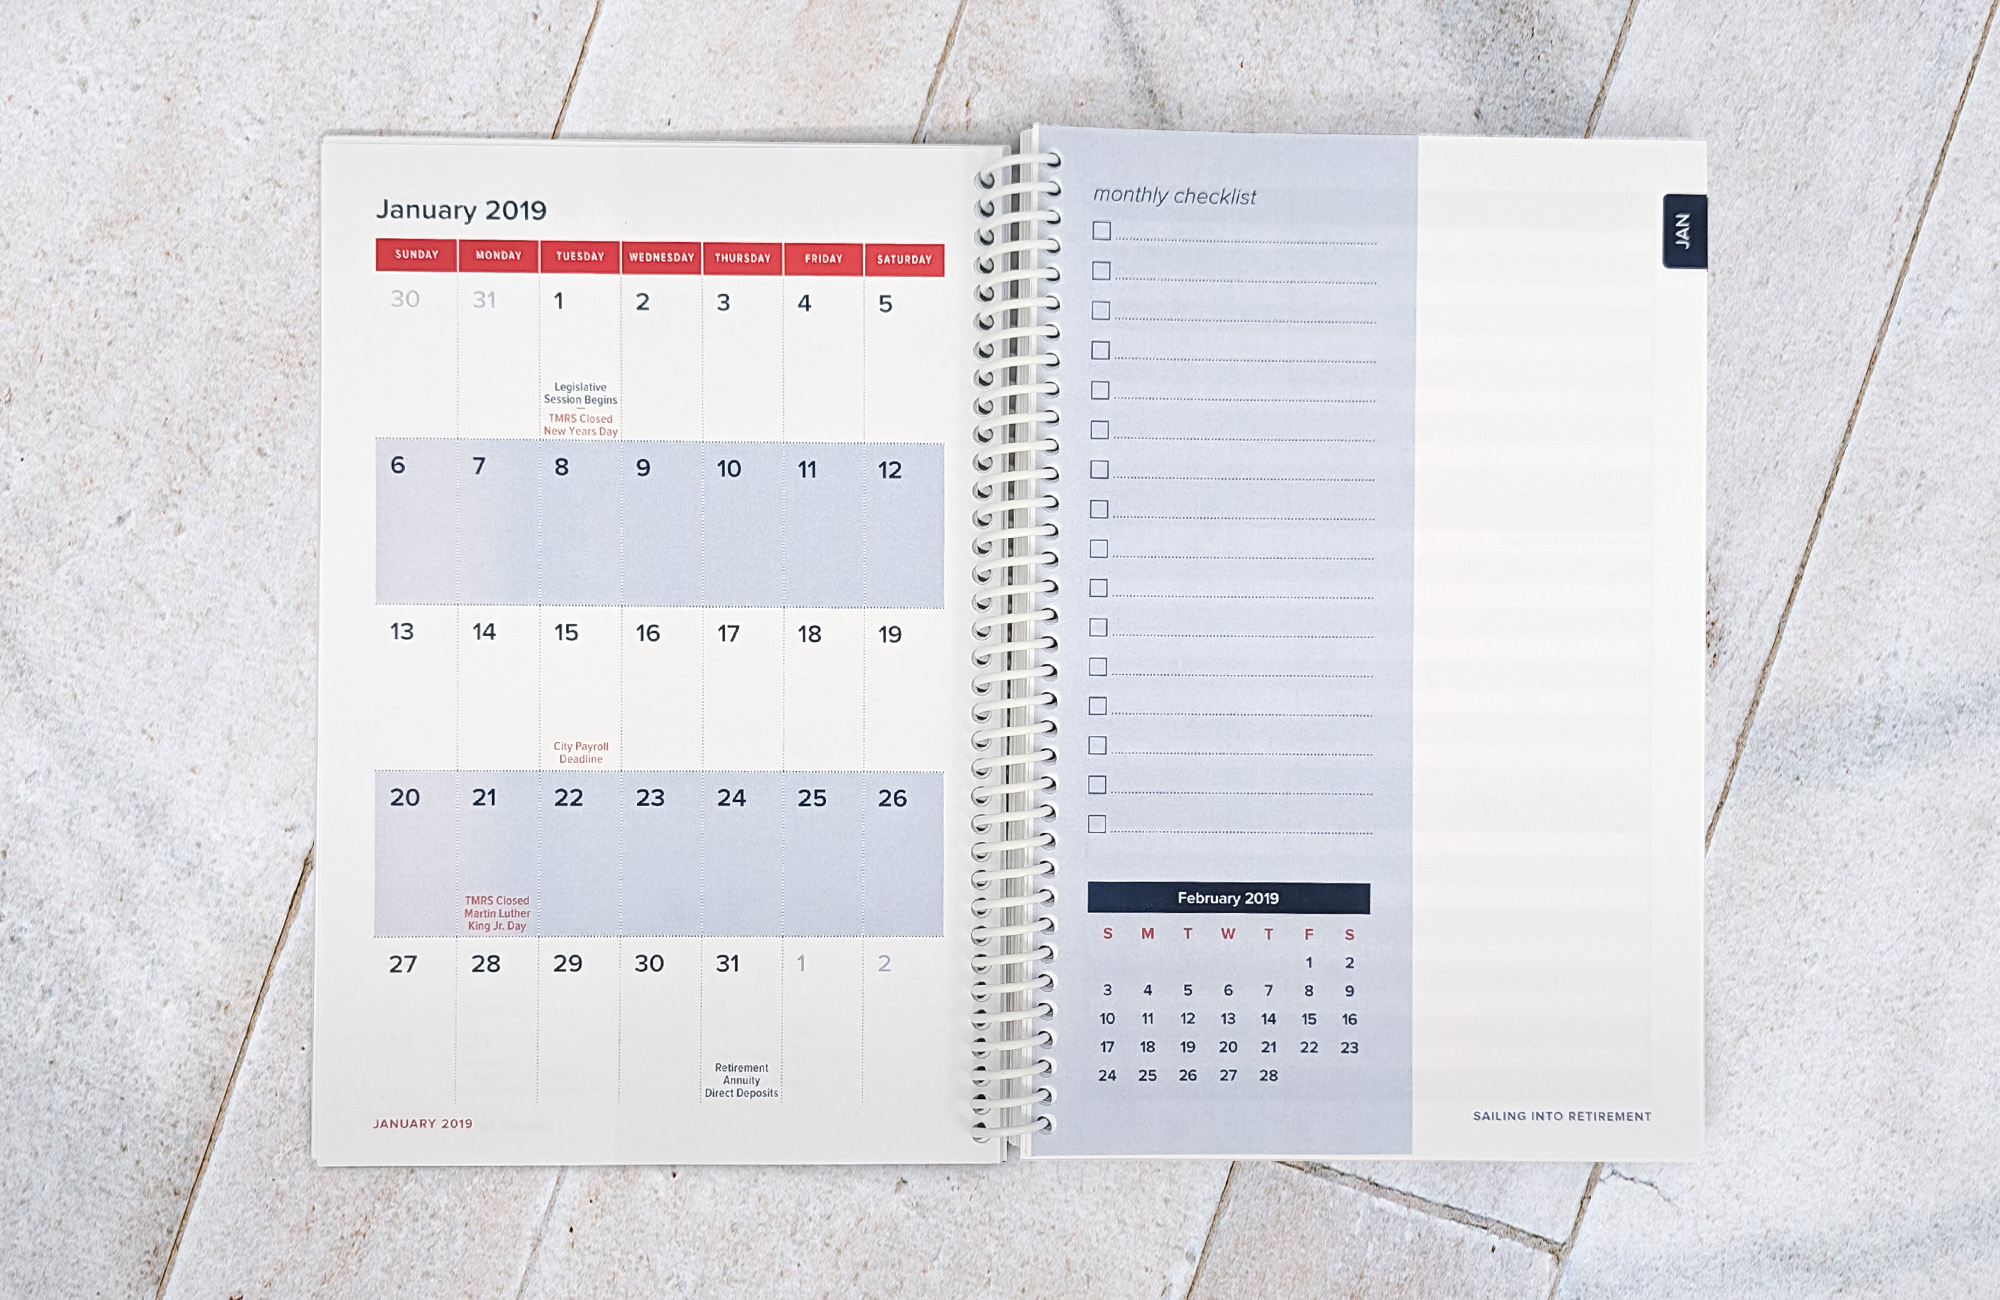 A coil-bound planner opened up to a spread that displays the month of January 2019 on the left hand side and a blank monthly checklist on the right.